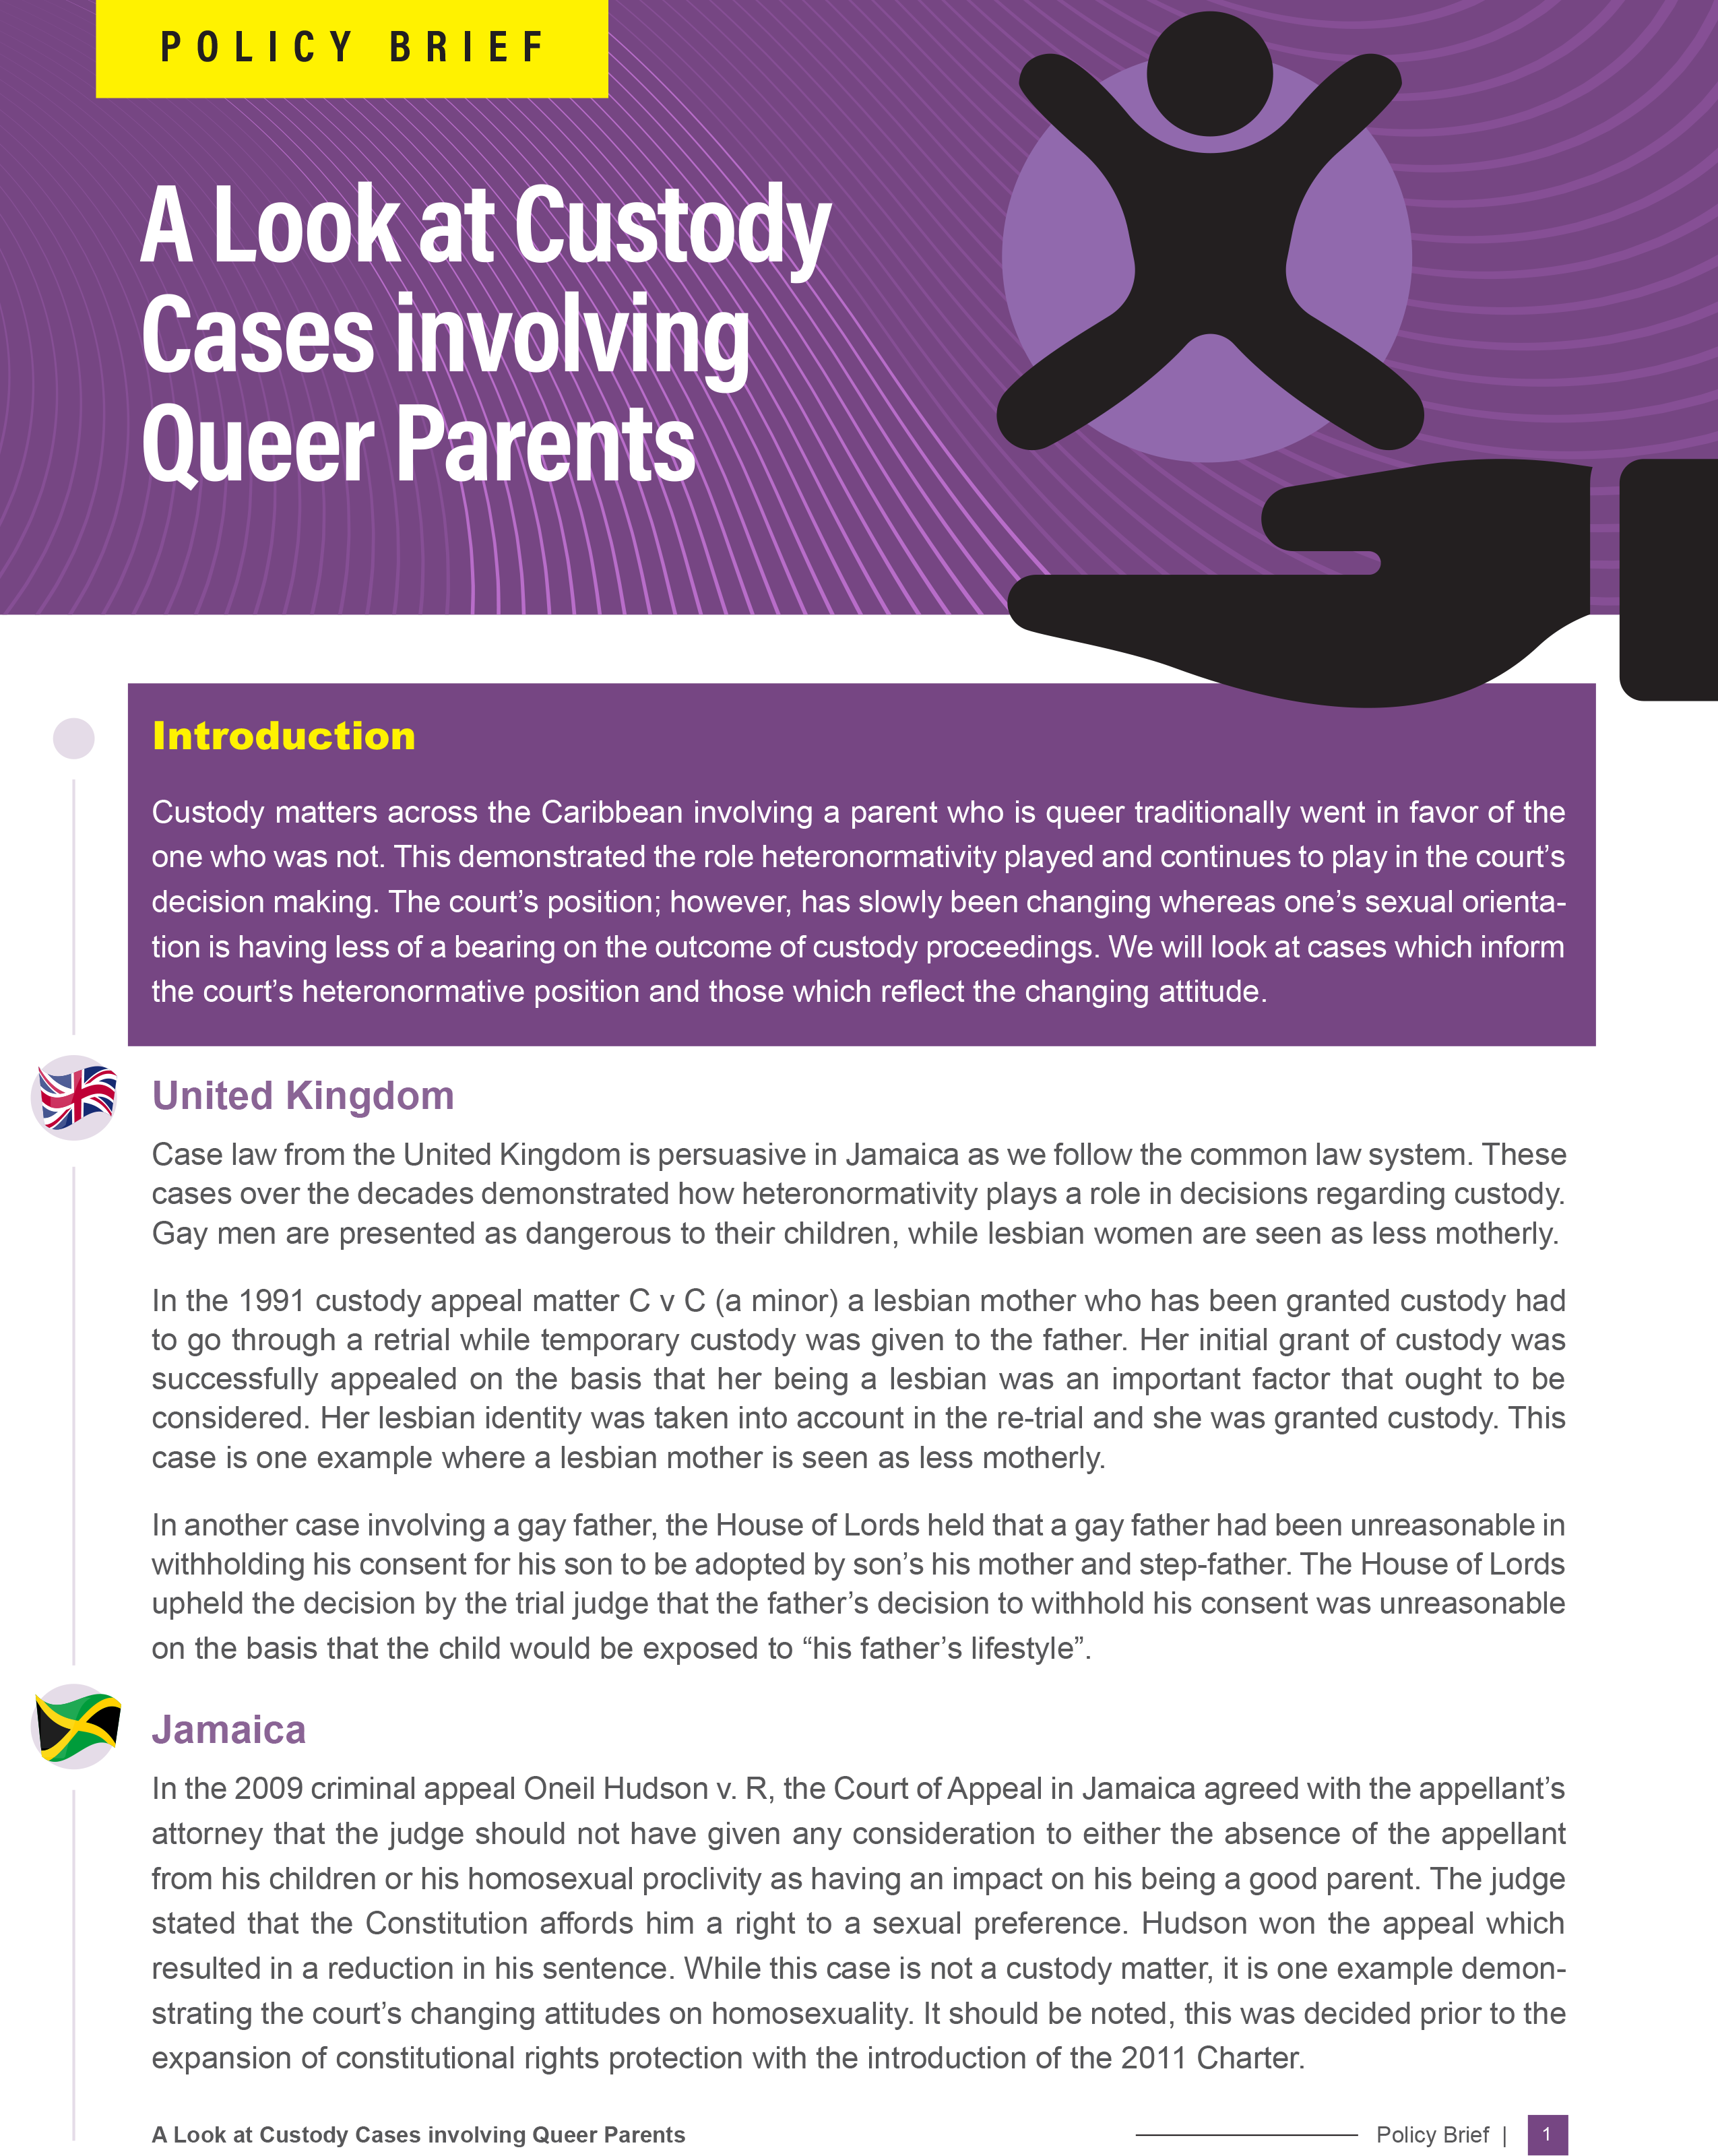 A Look at Custody Cases Involving Queer Parents